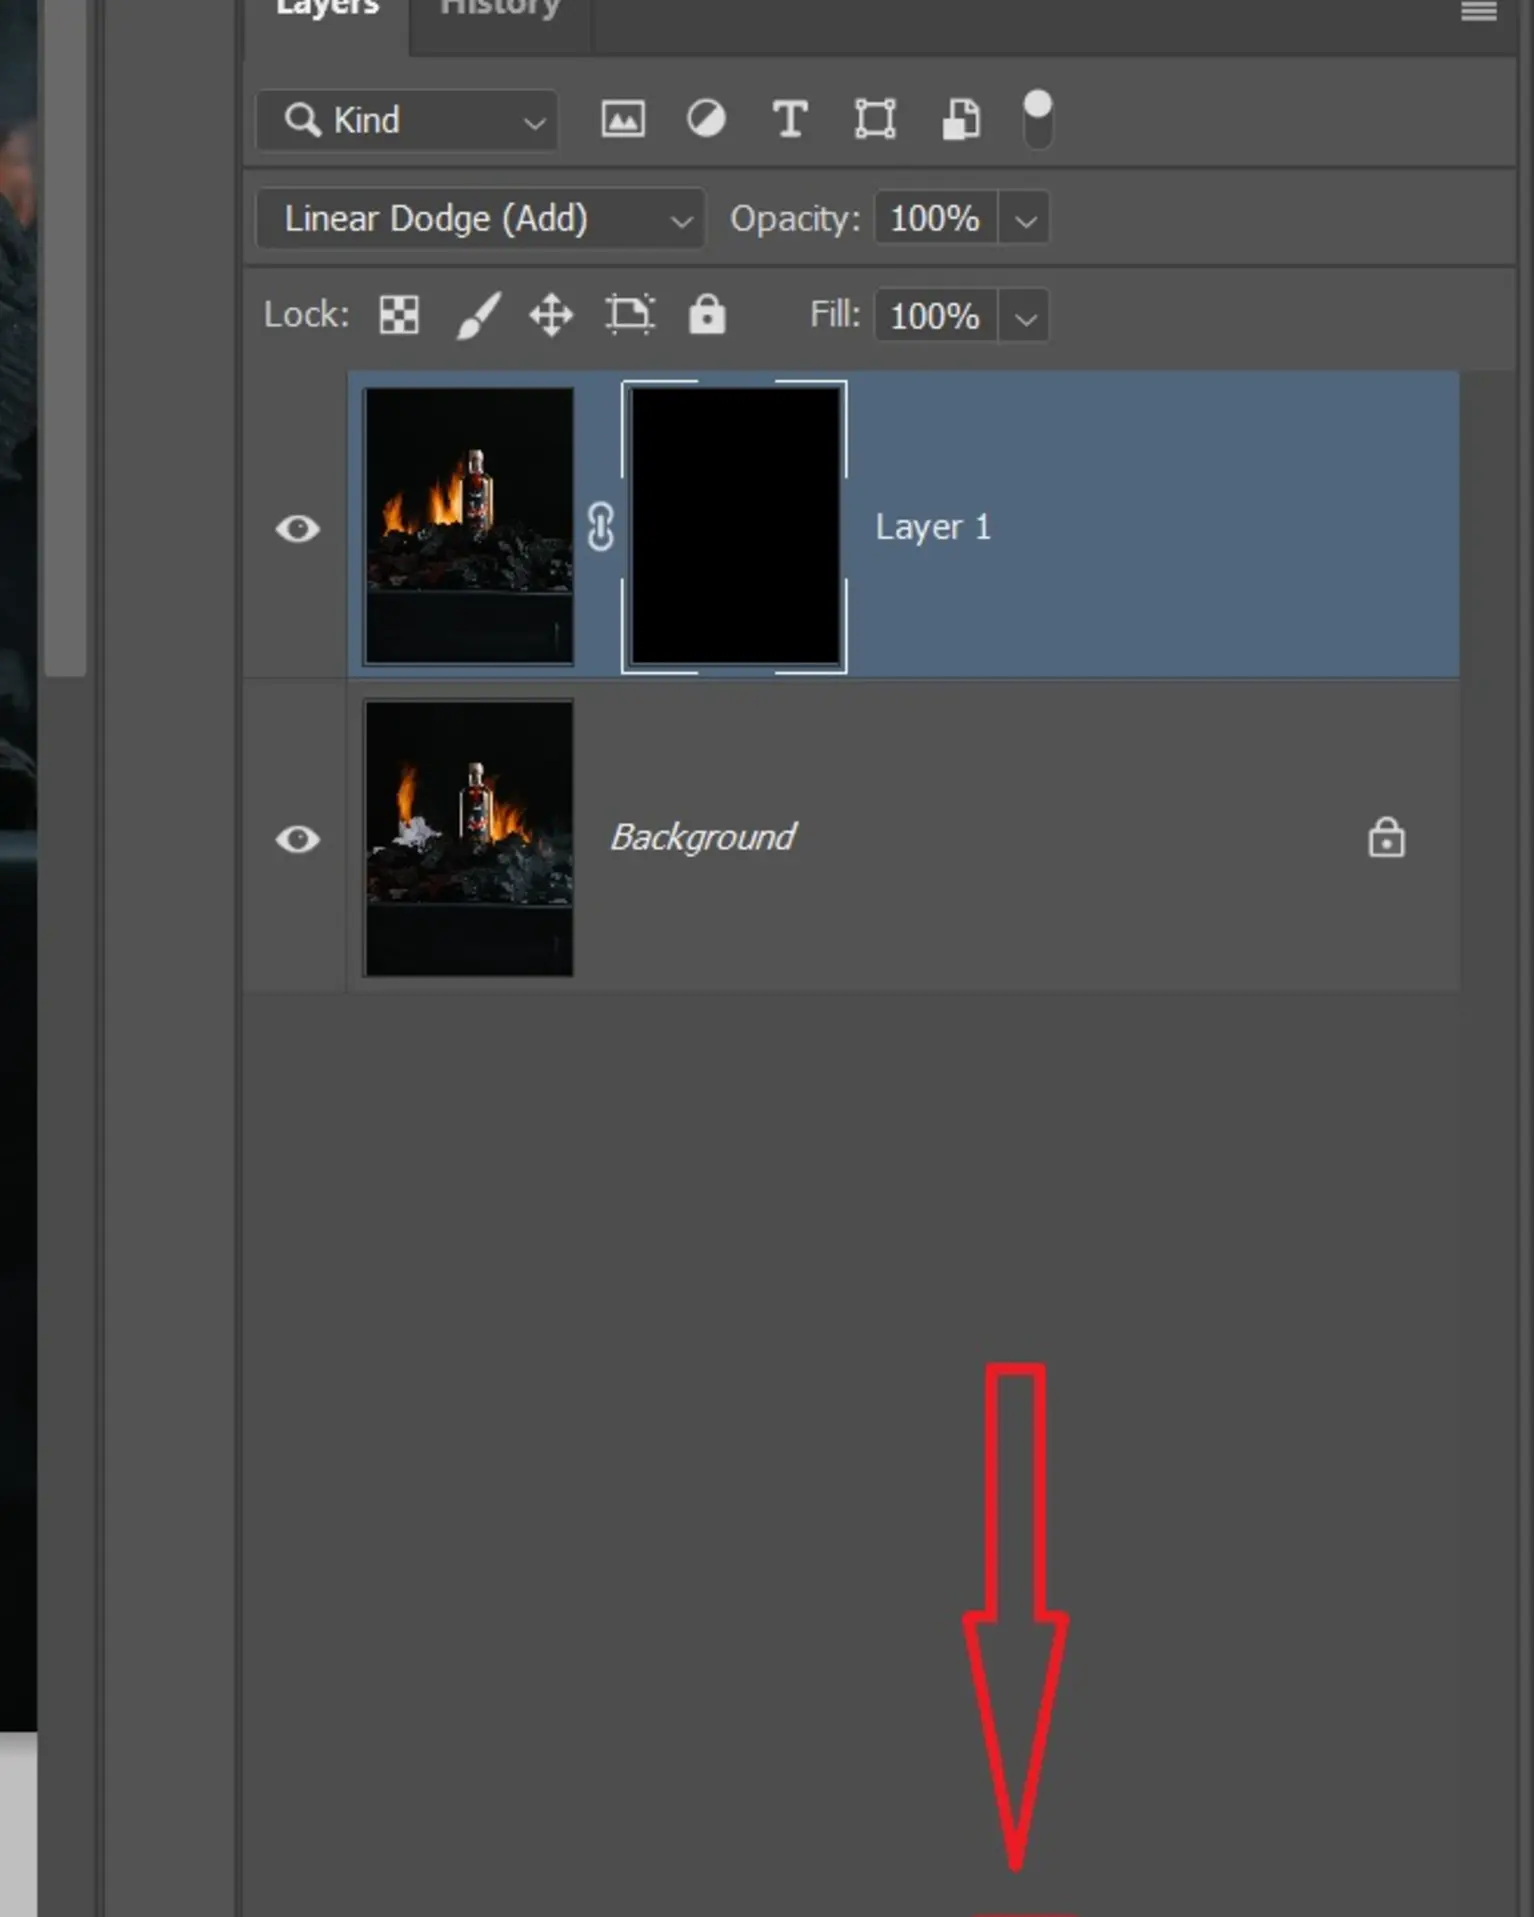 Photoshop - Mask. The image contains Photoshop layers and an arrow that draws attention to the add layer mask button.